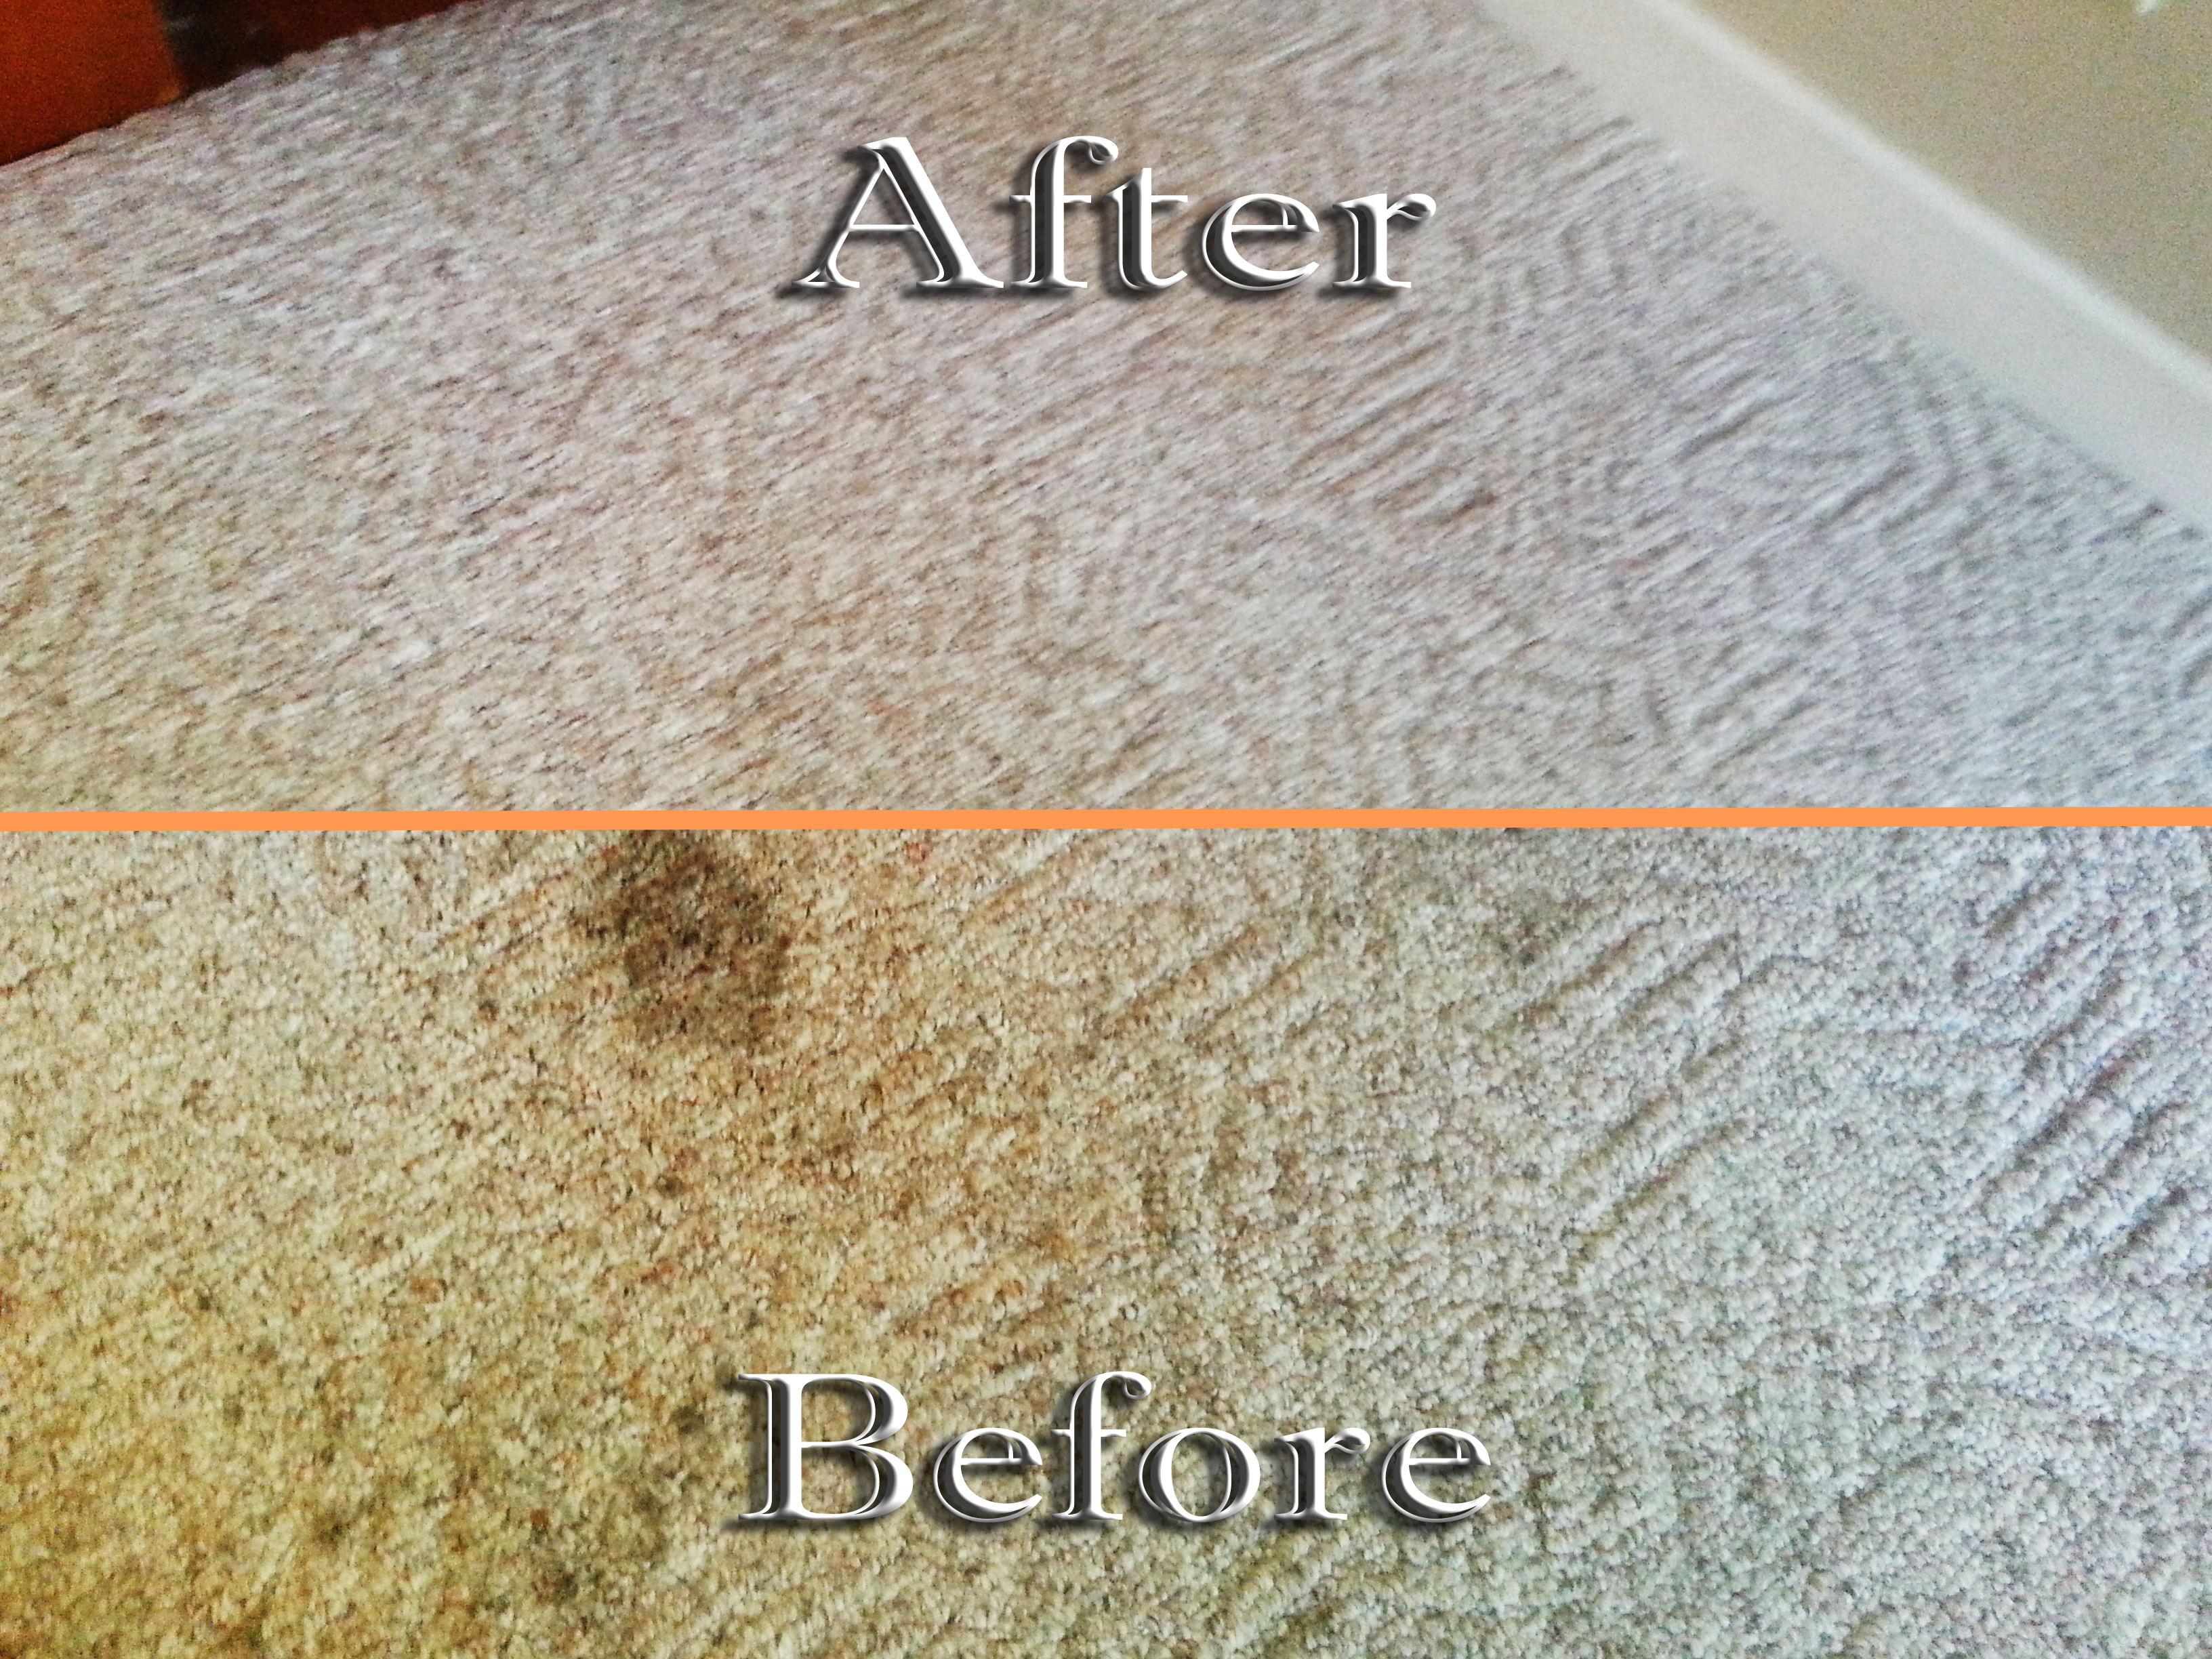 Carpet and Tile Cleaning before and after shots.